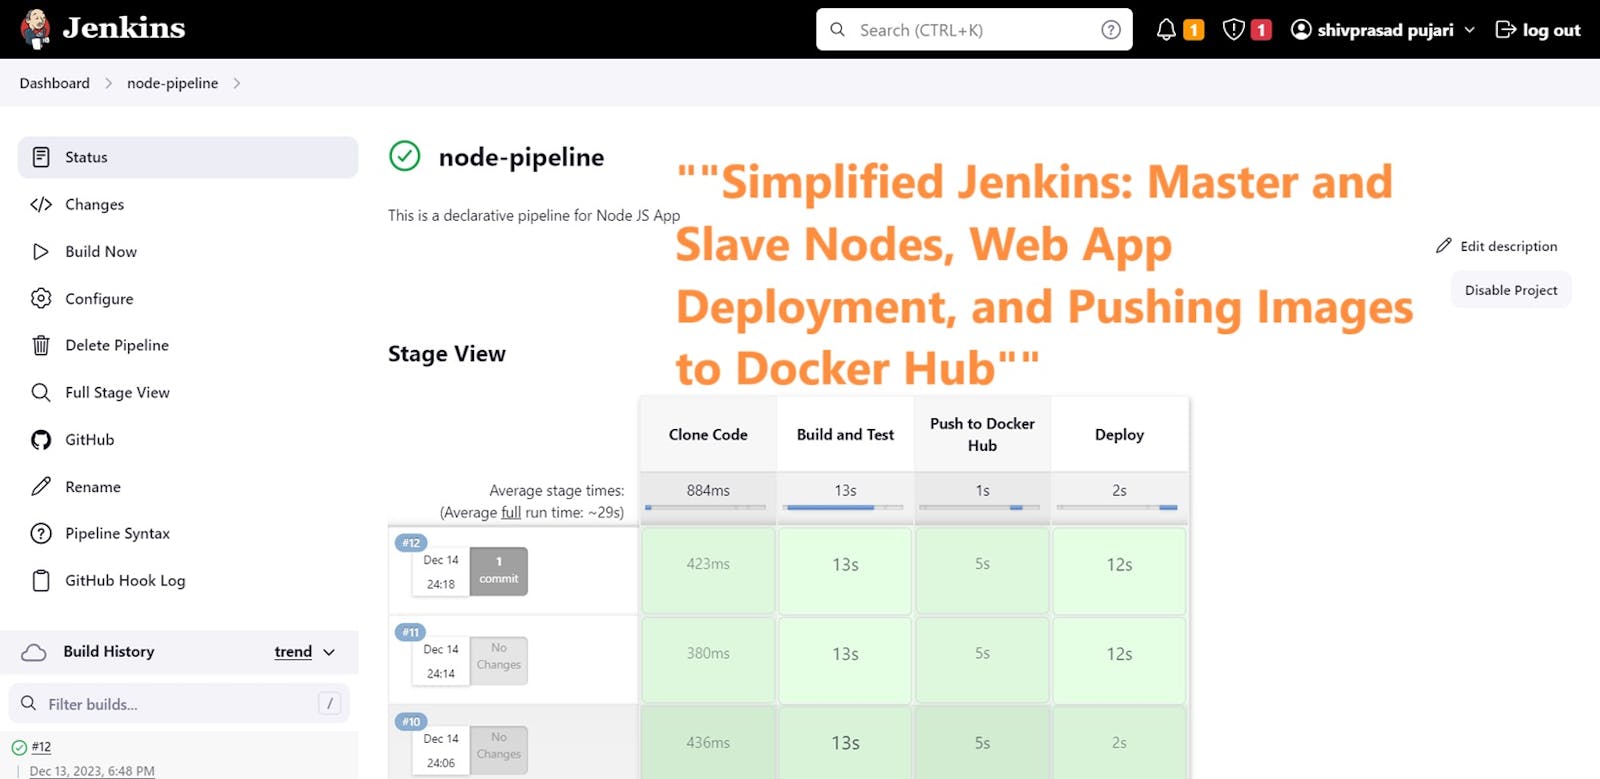 "Mastering Jenkins: A Guide to Configuring Nodes, Deploying Web Apps, and Pushing Images to Docker Hub Using Jenkins pipeline,"